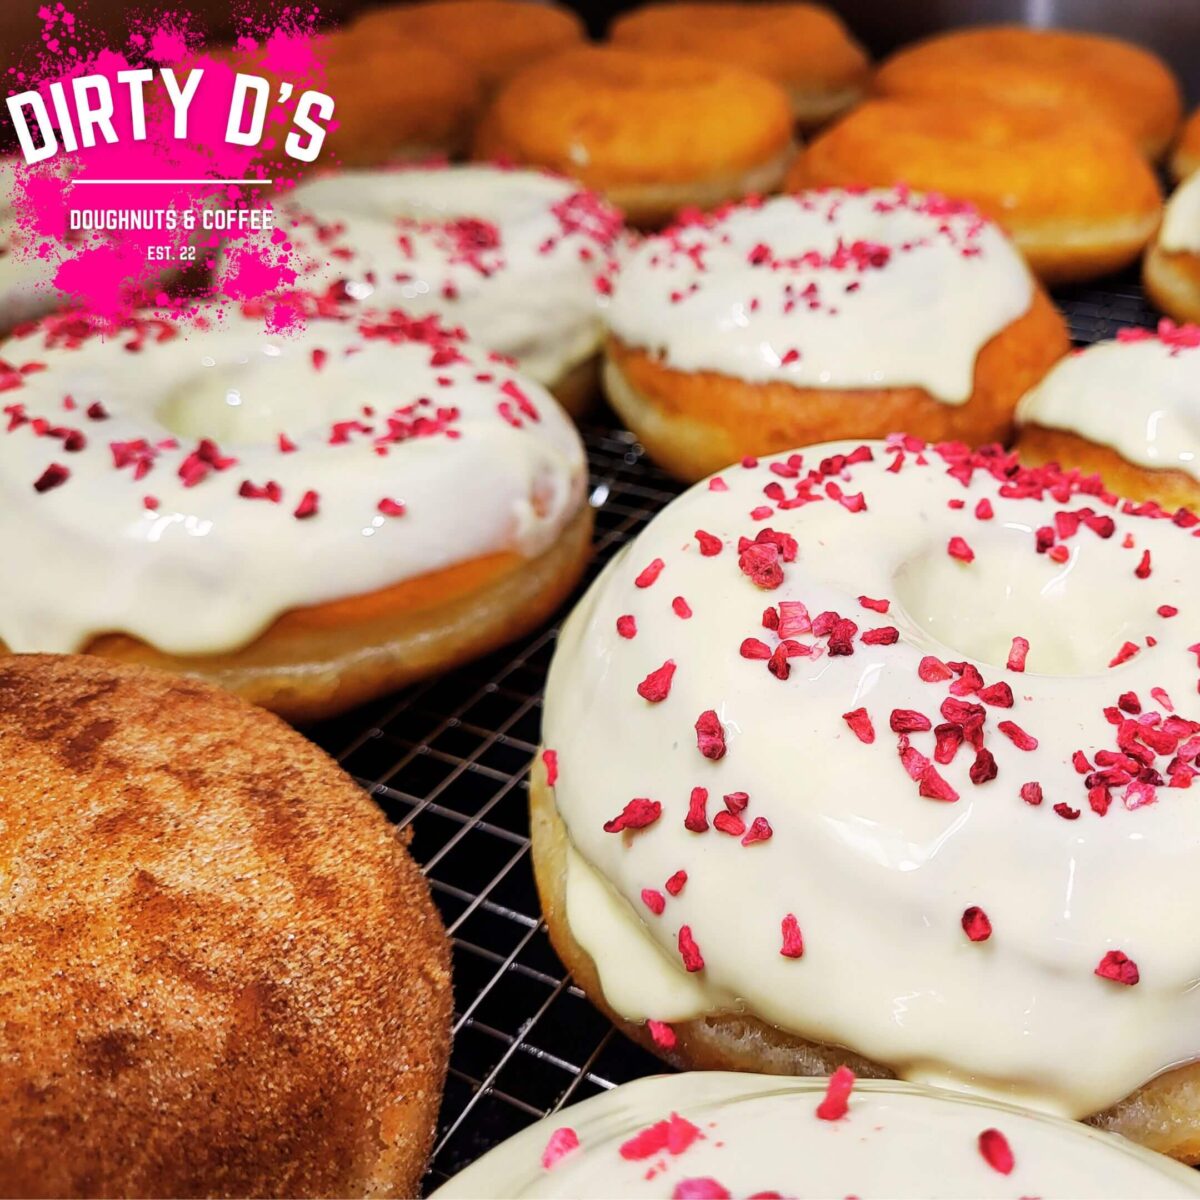 Doughnuts with white icing and pink sprinkles